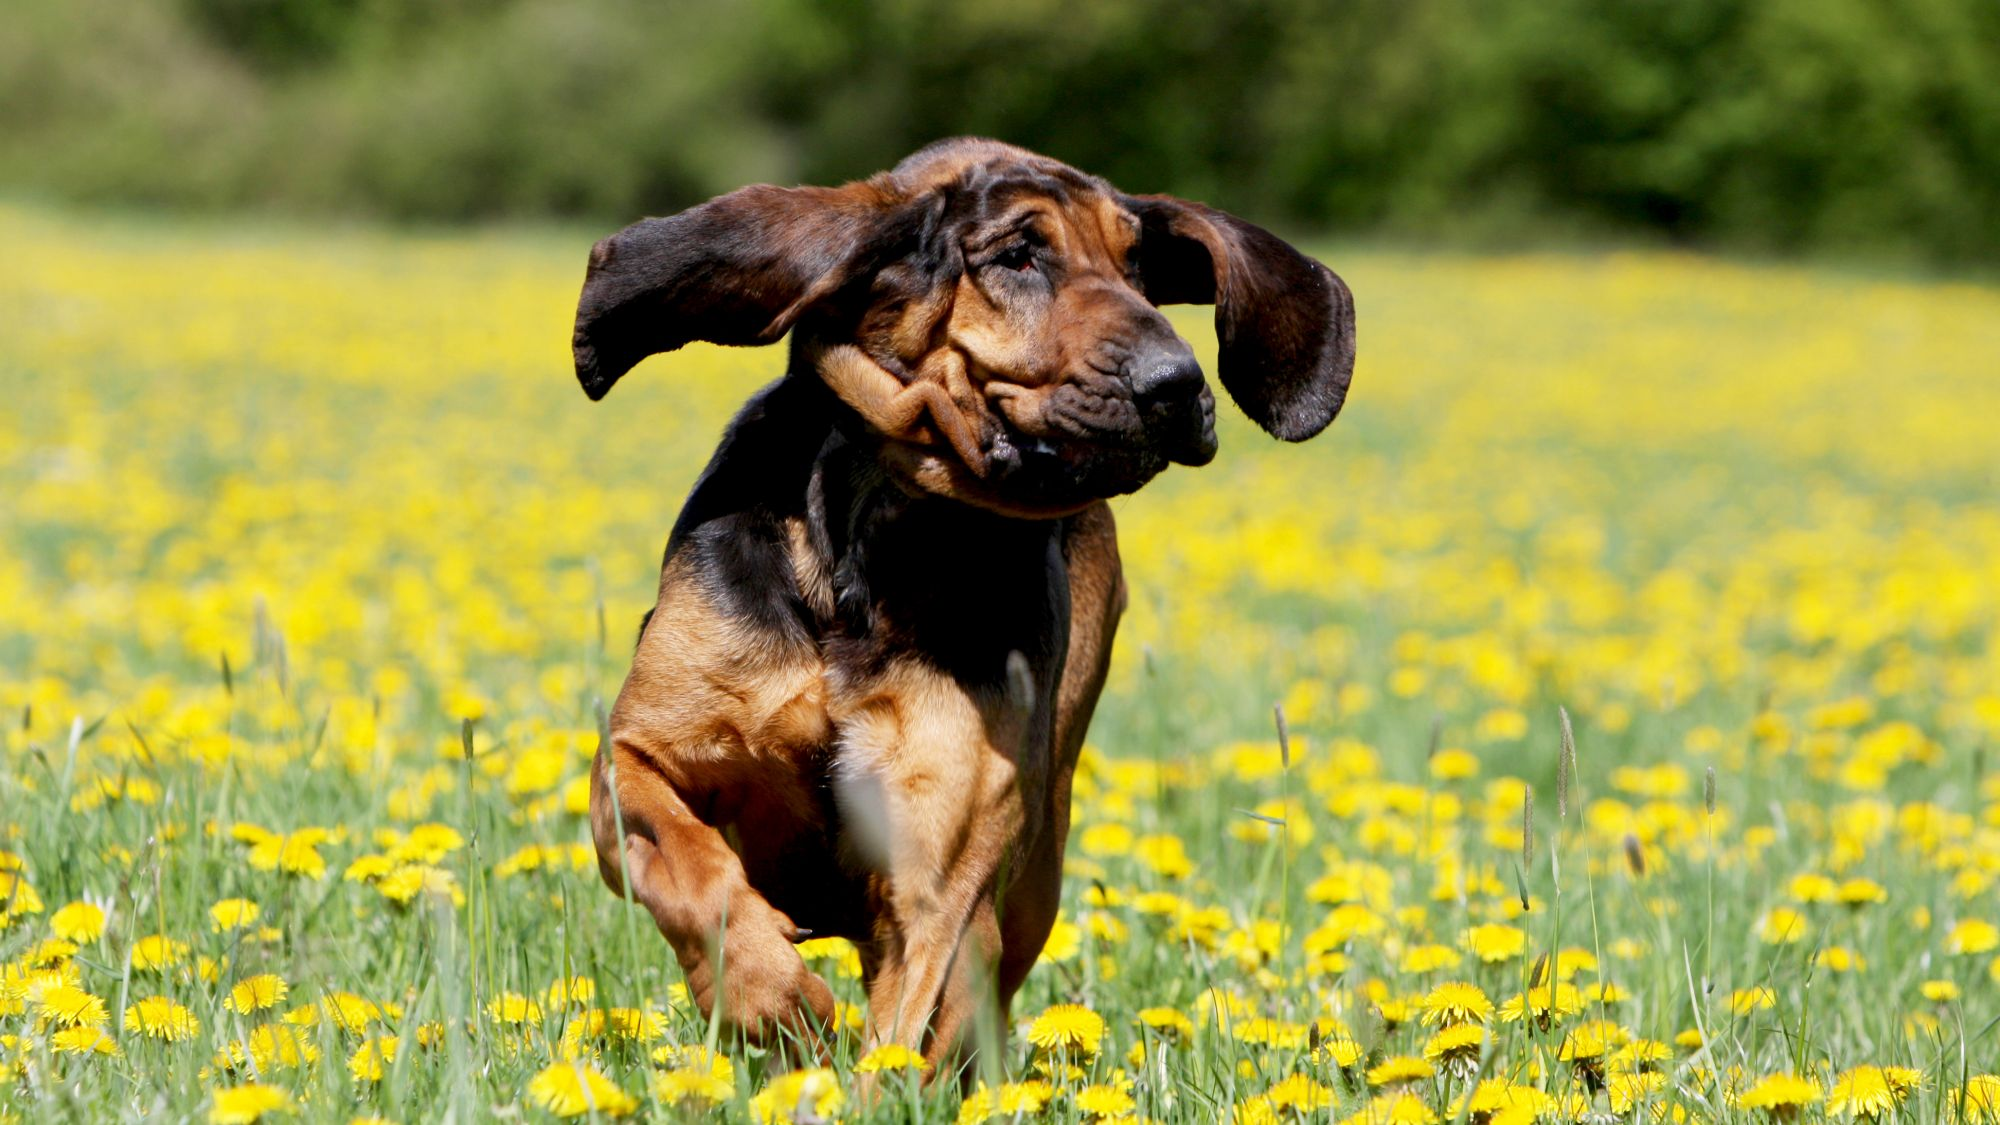 Bloodhound bounding through a field of yellow flowers